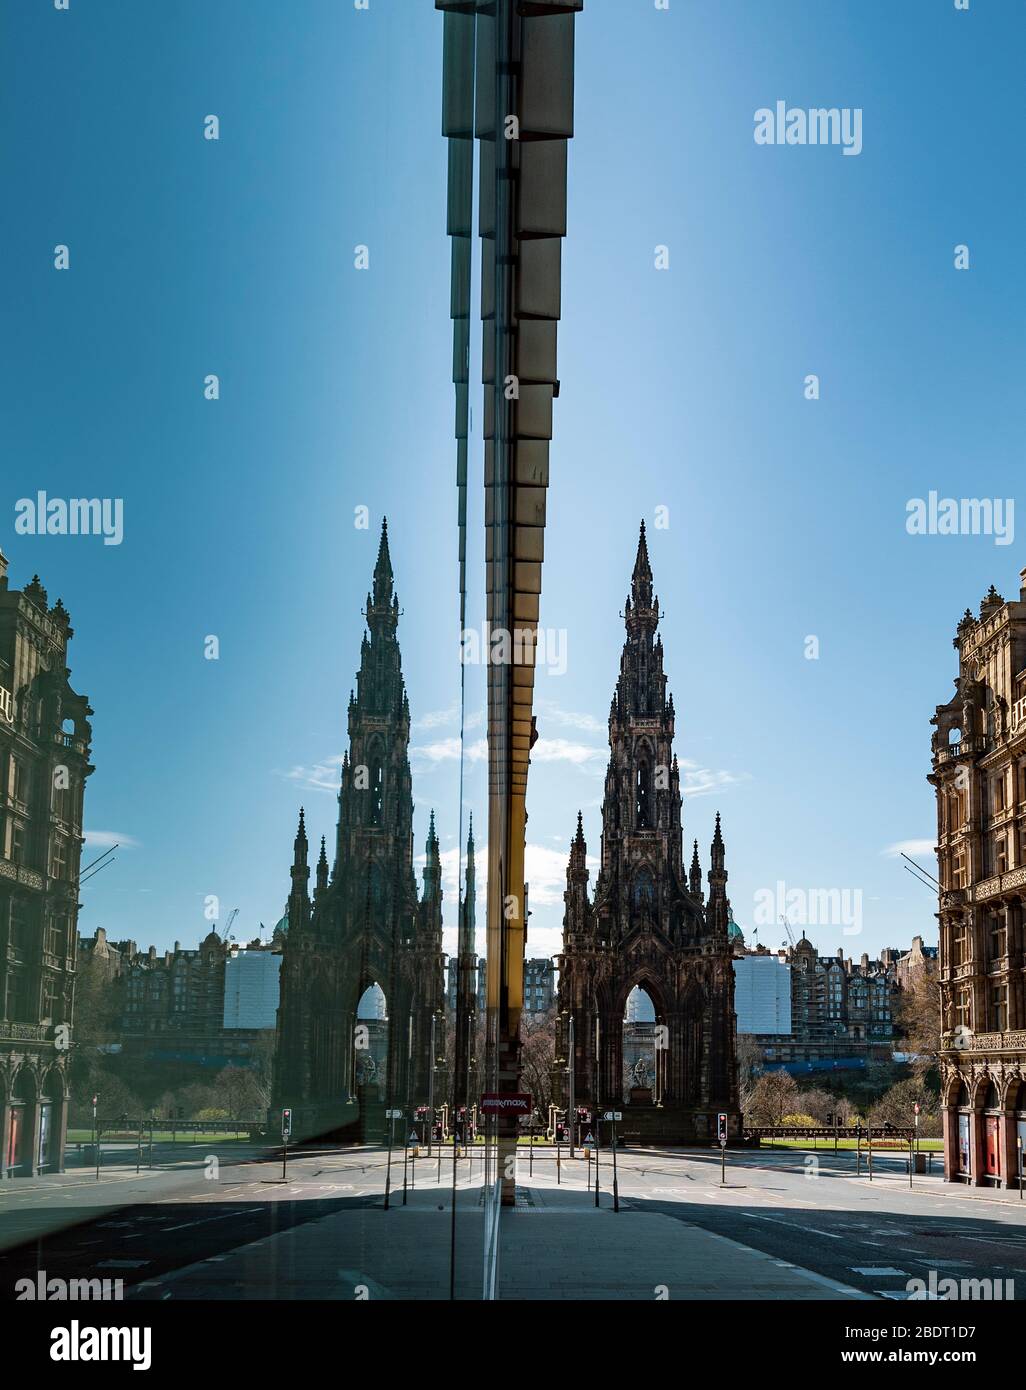 Edinburgh, Scotland, UK. 8 April 2020. Images from Edinburgh during the continuing Coronavirus lockdown. Pictured; View of Scott monument from deserted South St David Street in city centre. Iain Masterton/Alamy Live News. Stock Photo